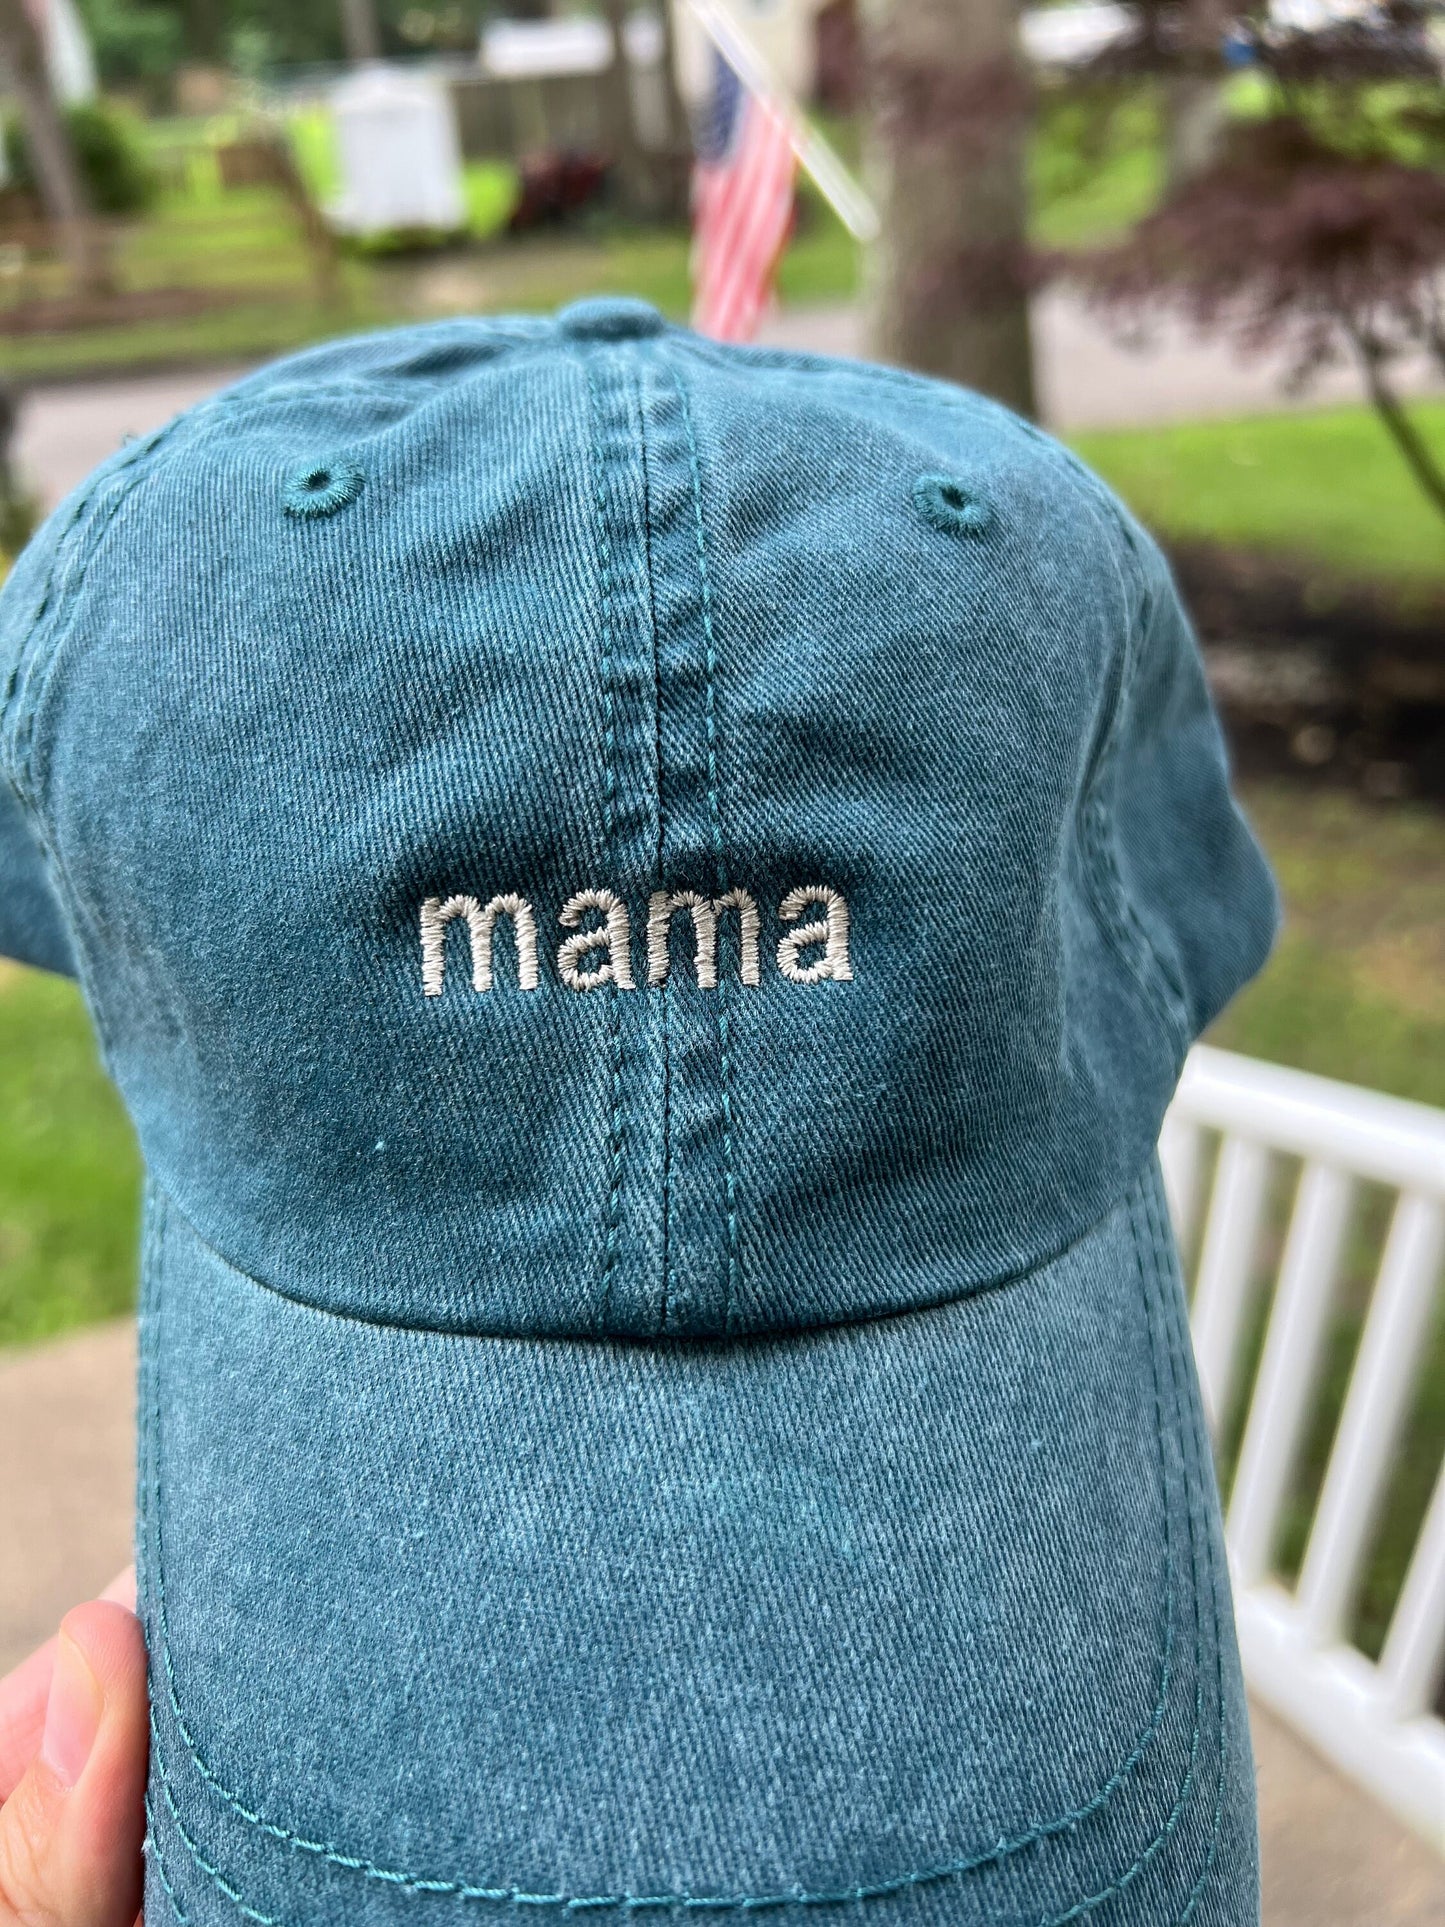 Mama Hat Mom Gift For Her Embroidered Baseball Hat